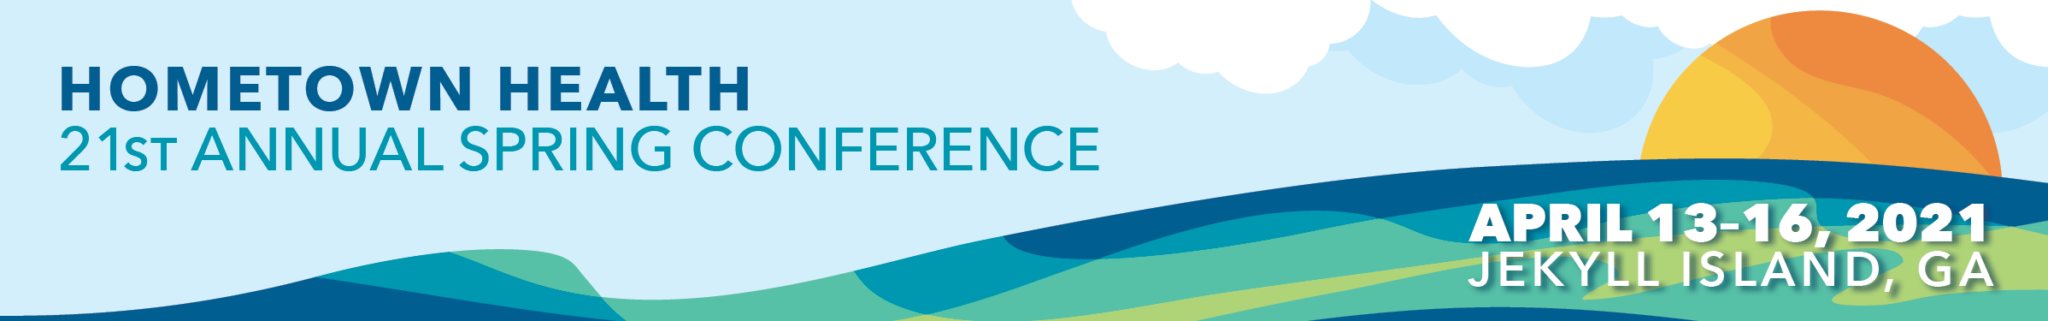 2021 Spring Conference | Hometown Health Online